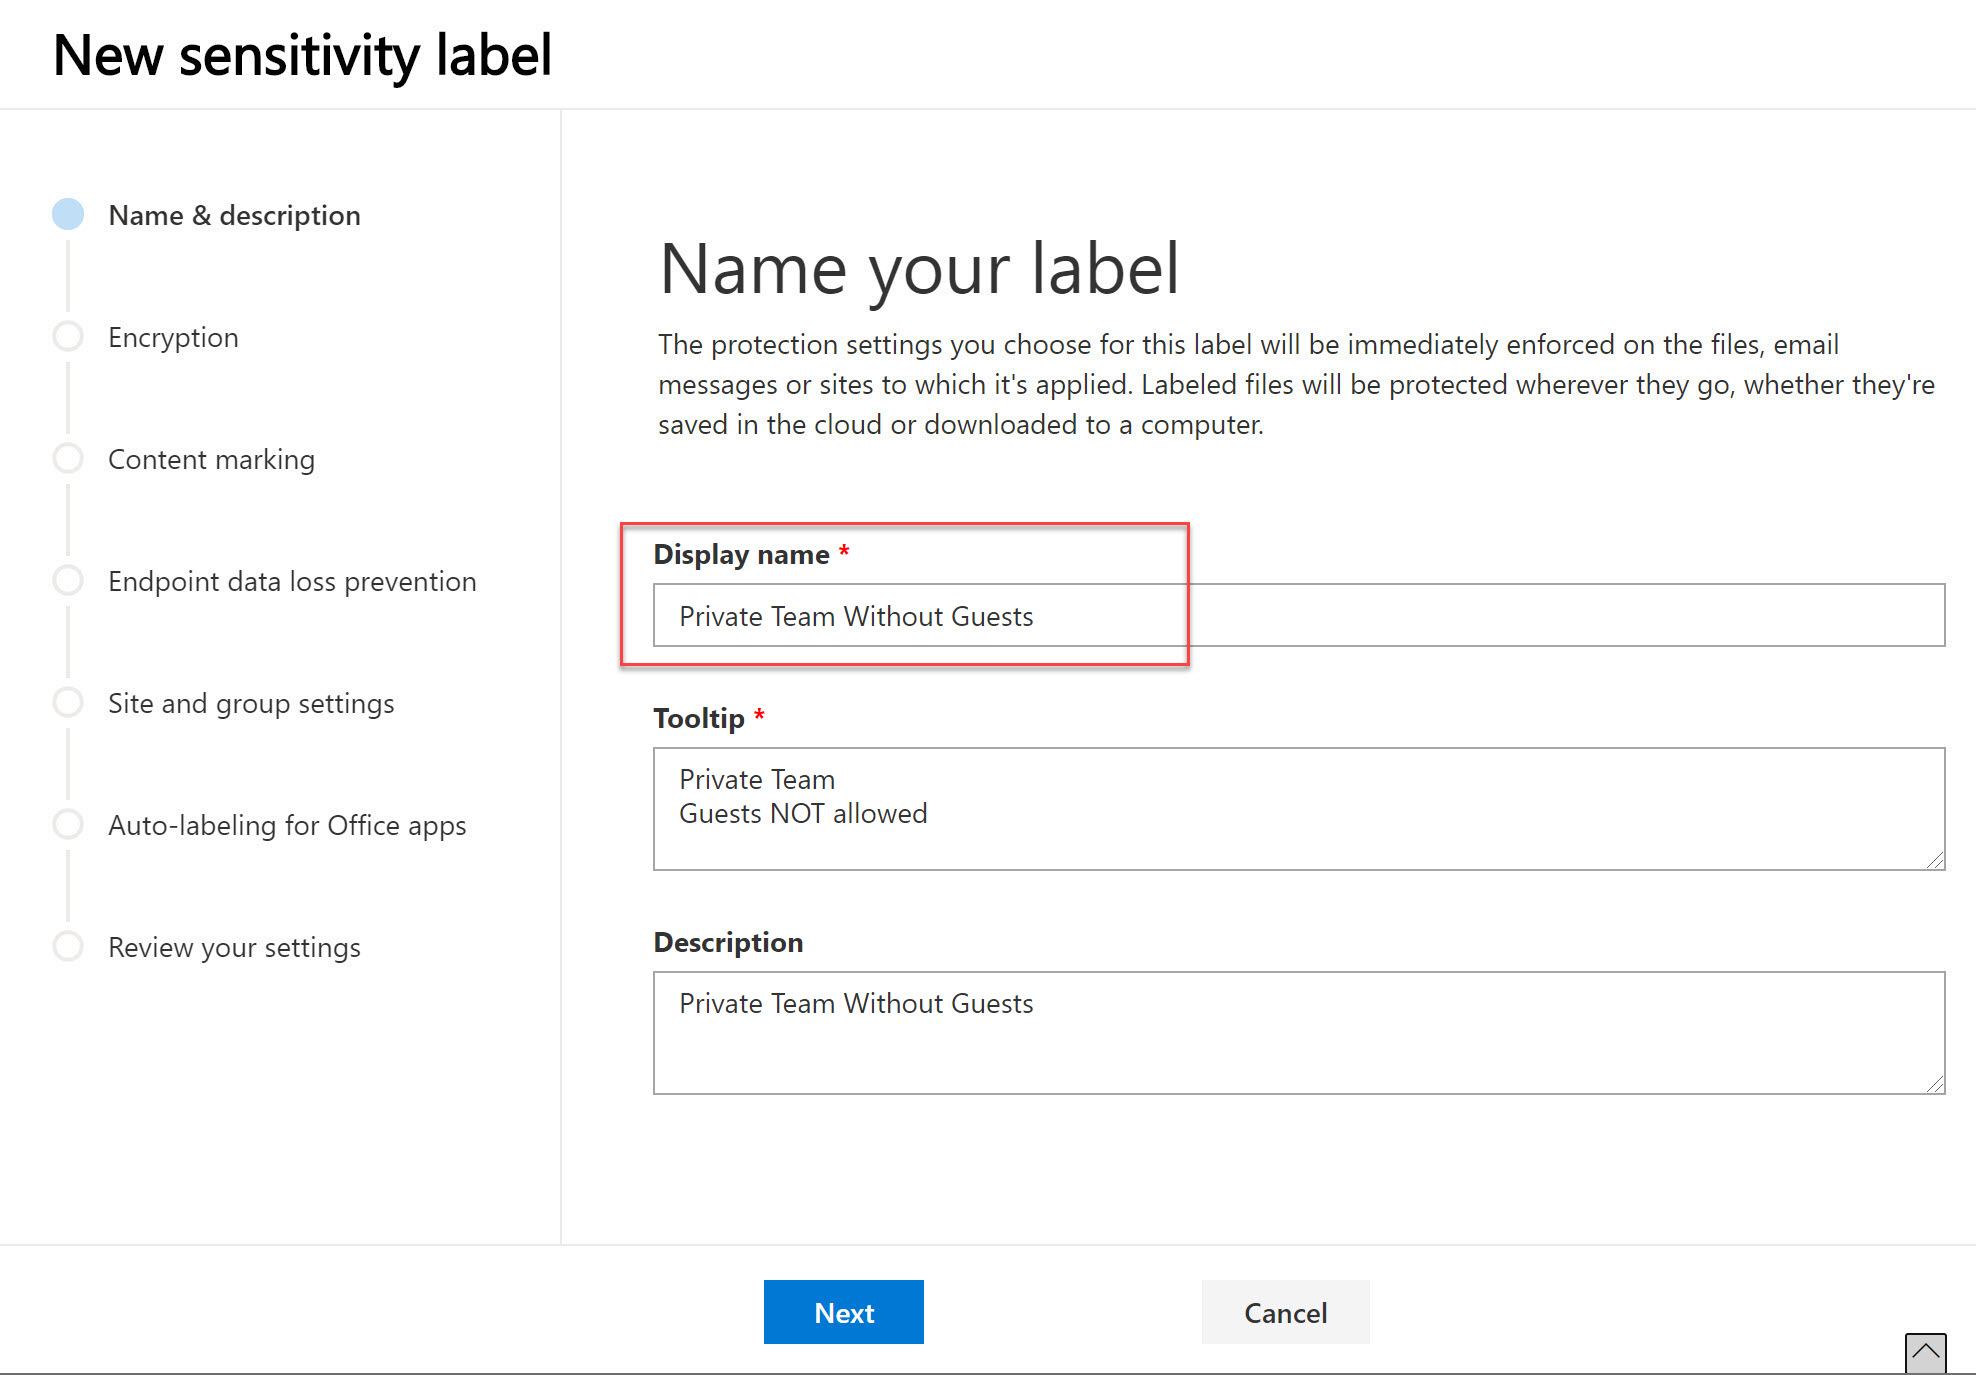 How to Migrate from Azure Information Protection Labels to Sensitive Labels and use them in Teams